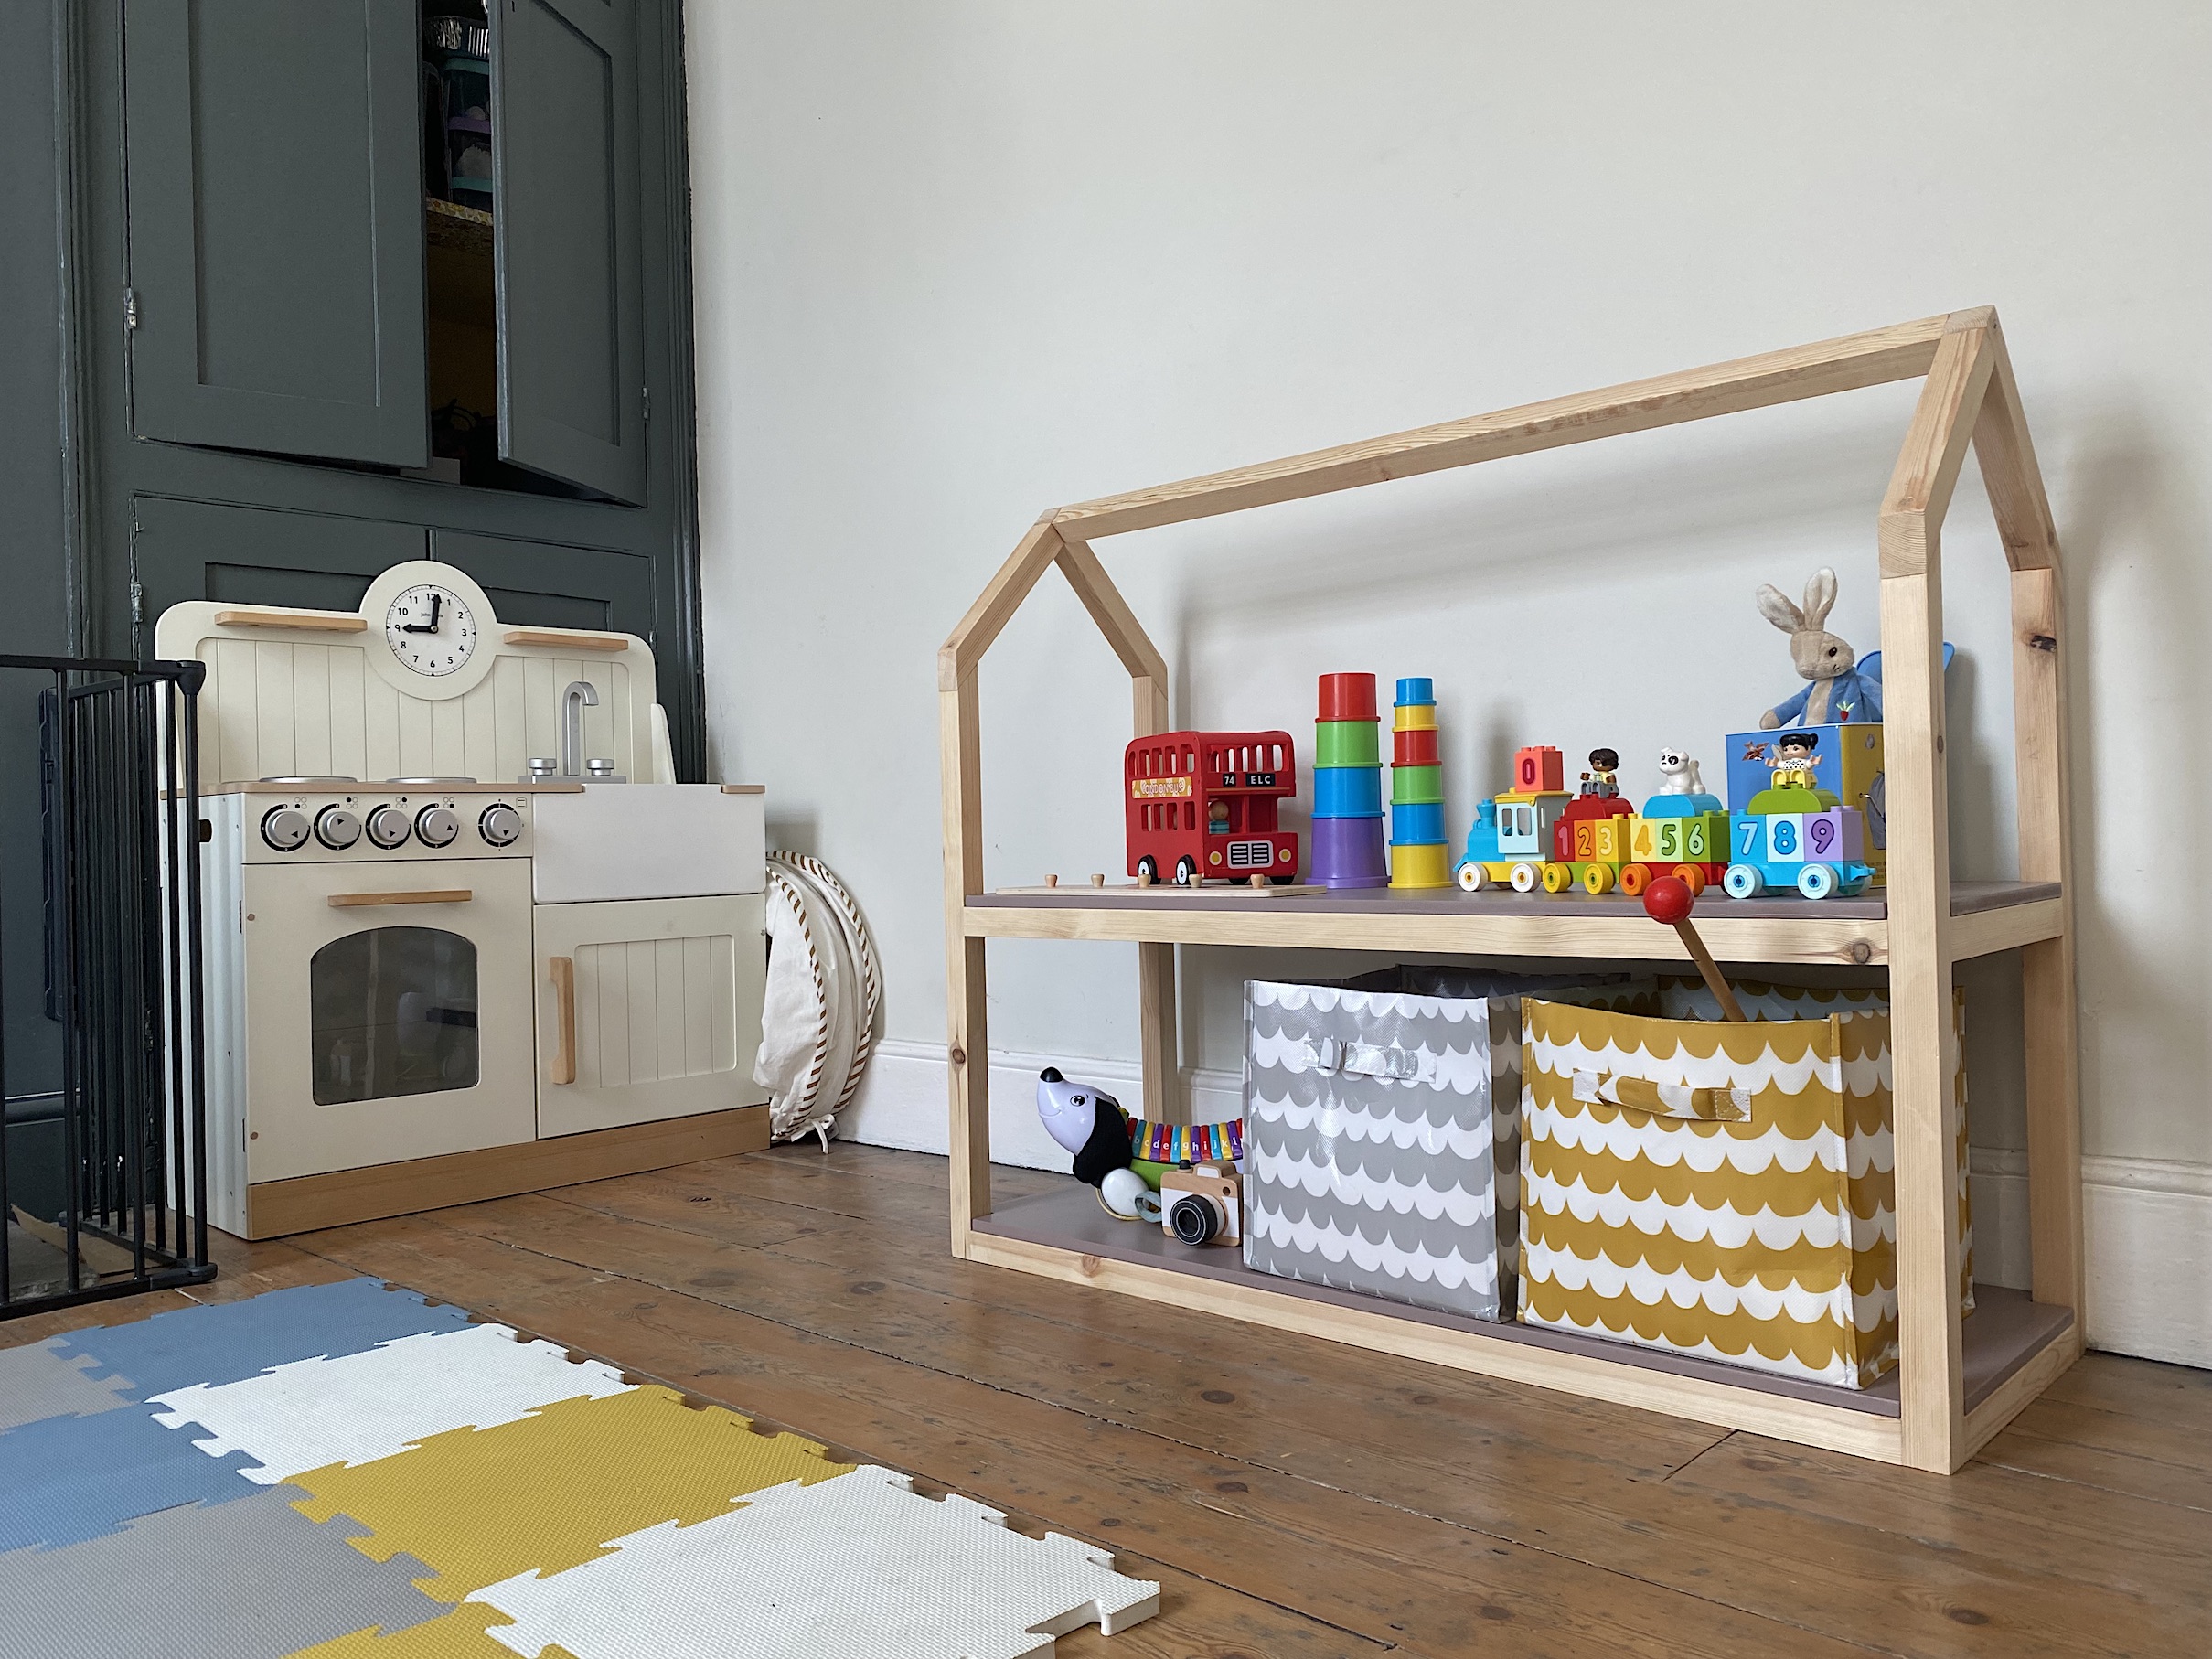 DIY toy storage in the shape of a house